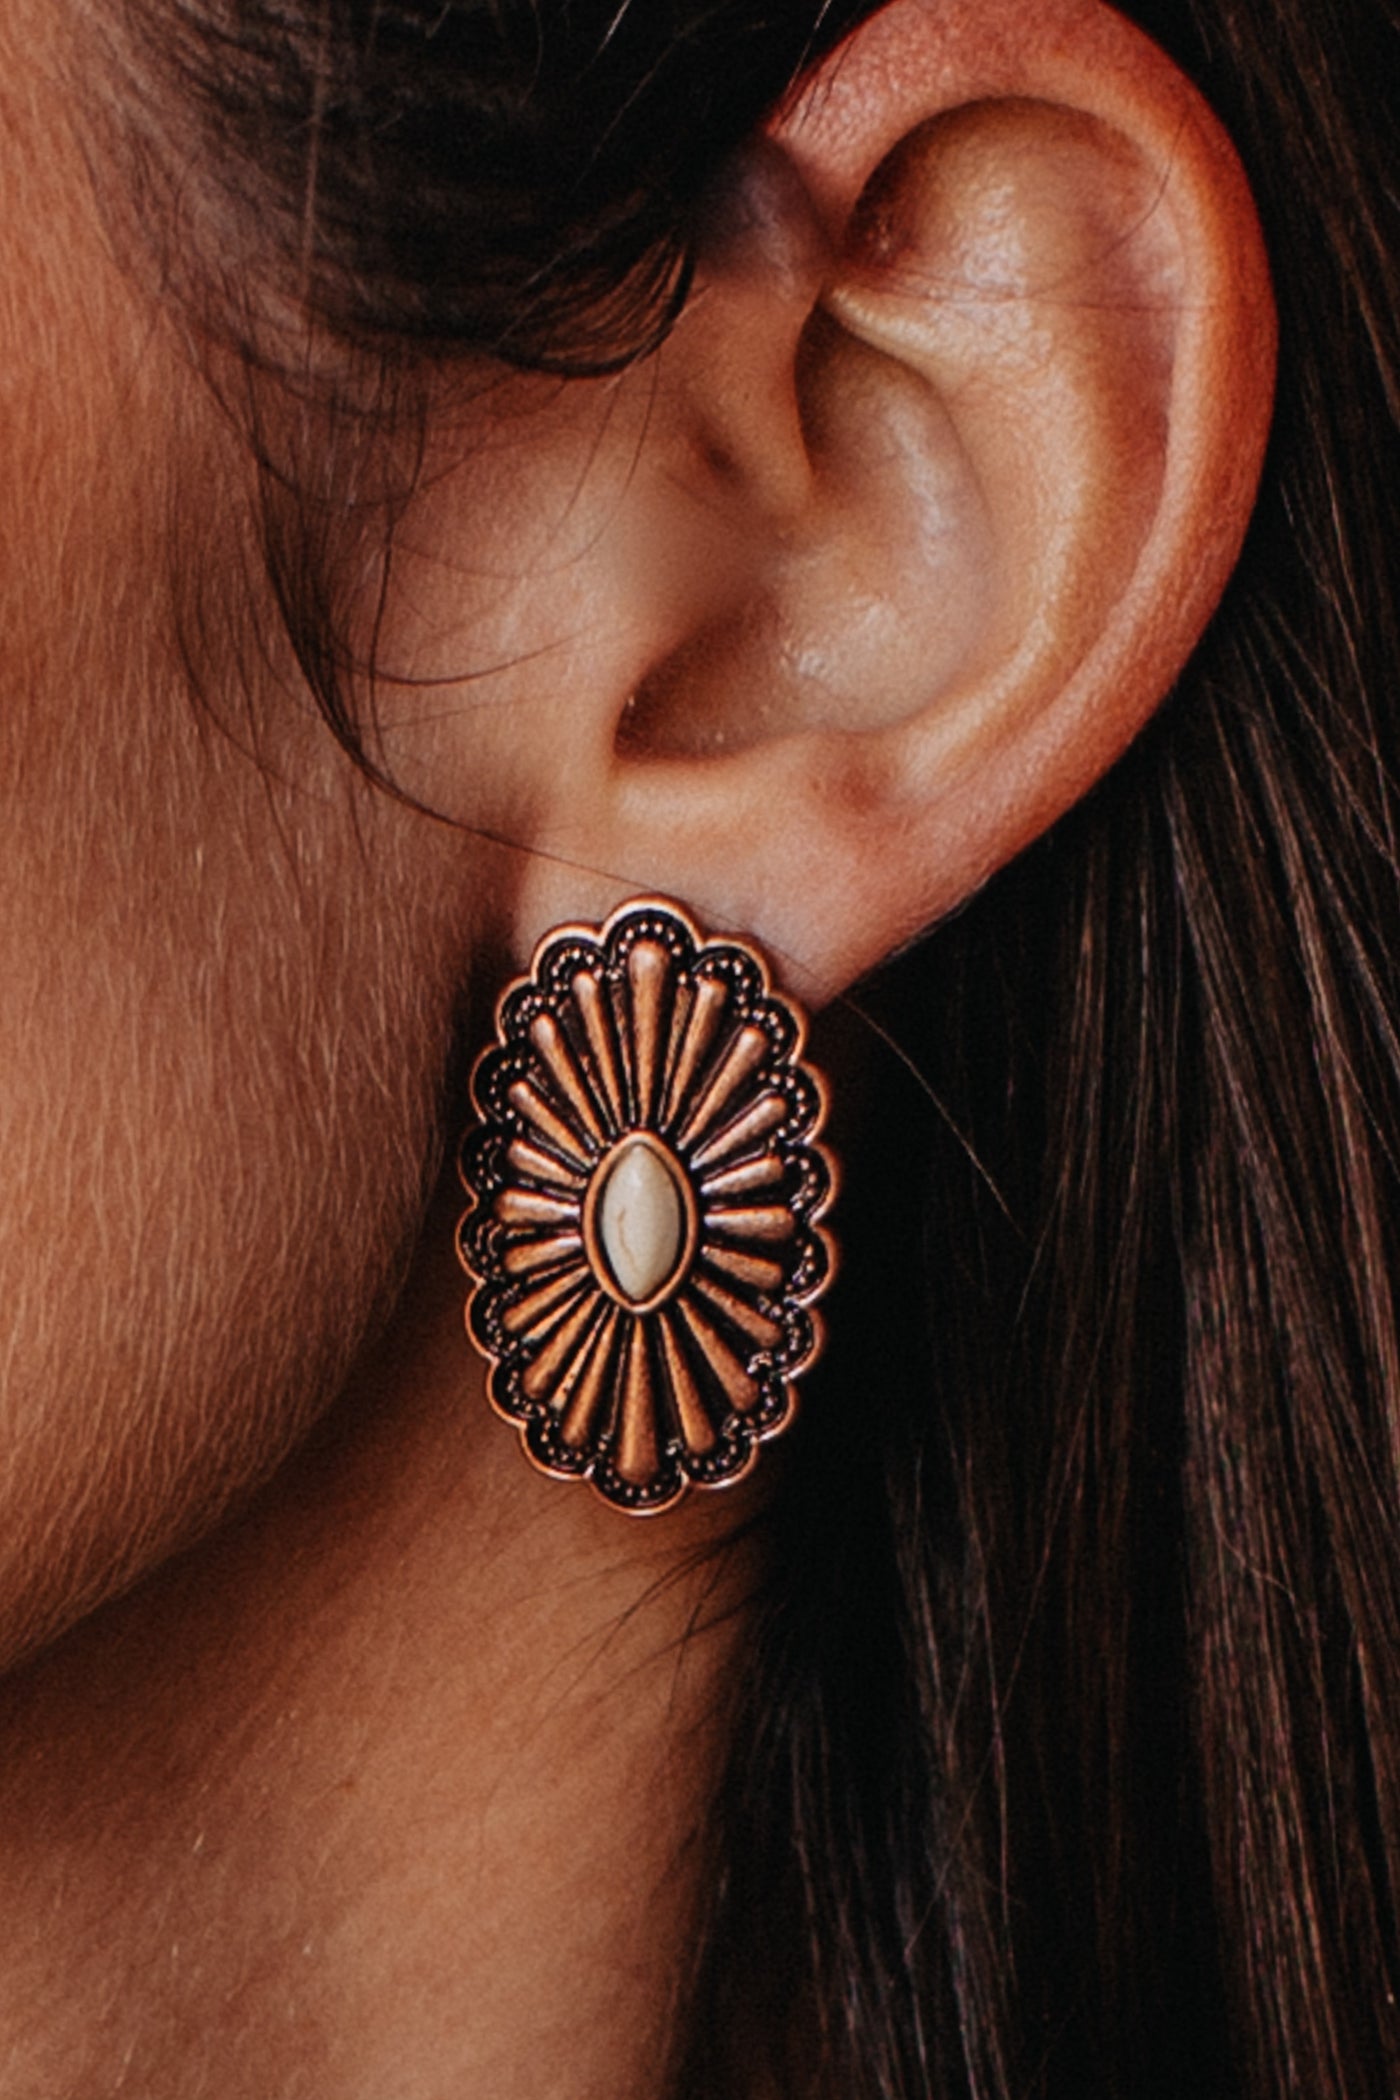 Can't Contain Country Copper & Cream Stud Earrings